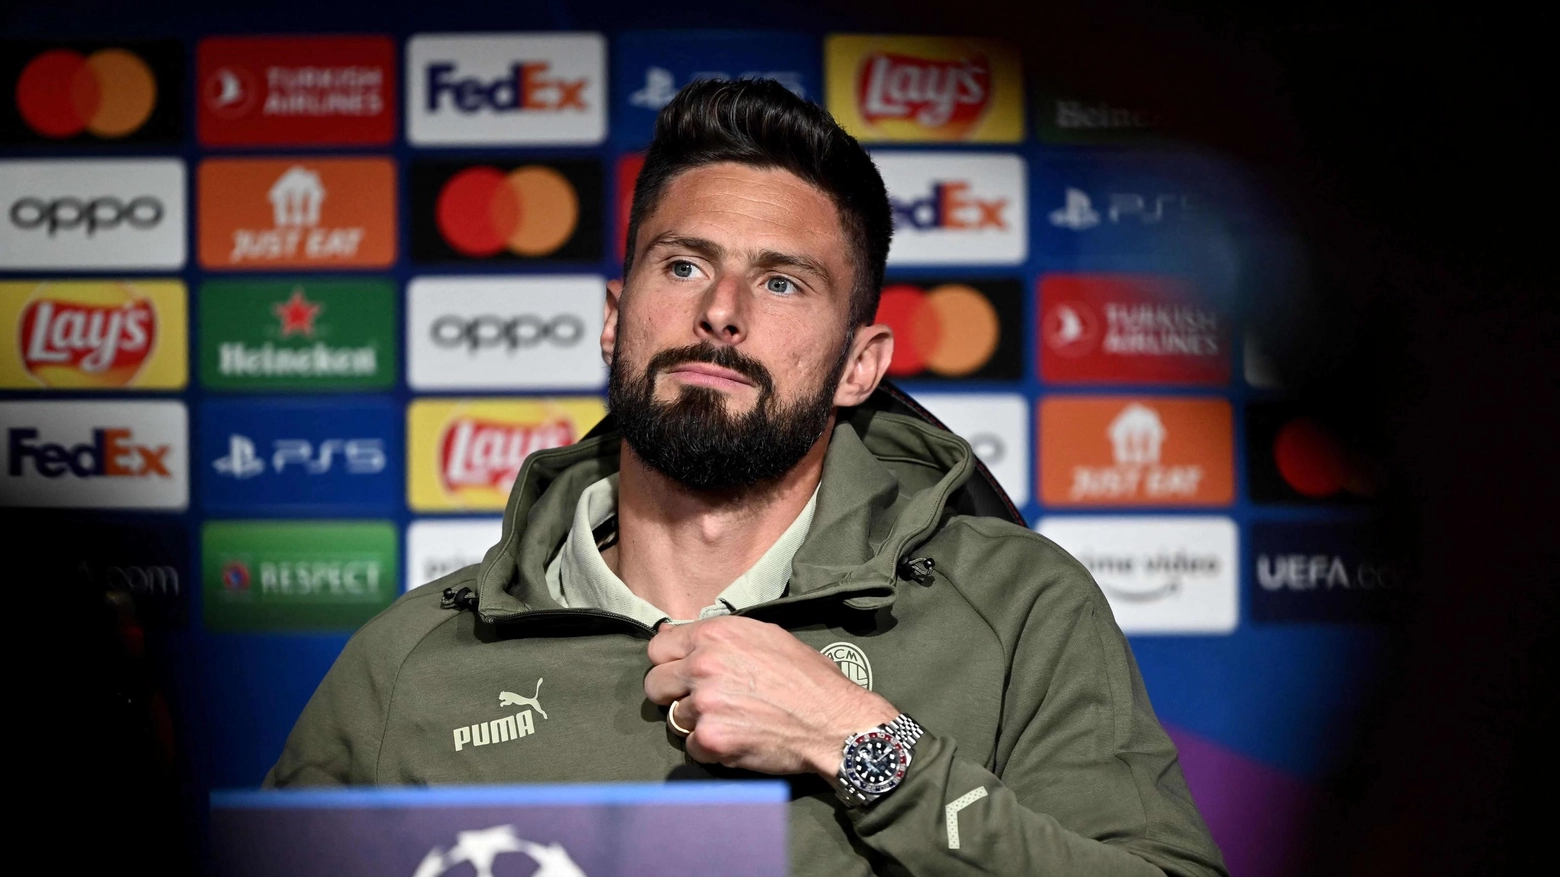 Olivier Giroud in conferenza stampa prima dell'andata dell'euroderby Milan-Inter